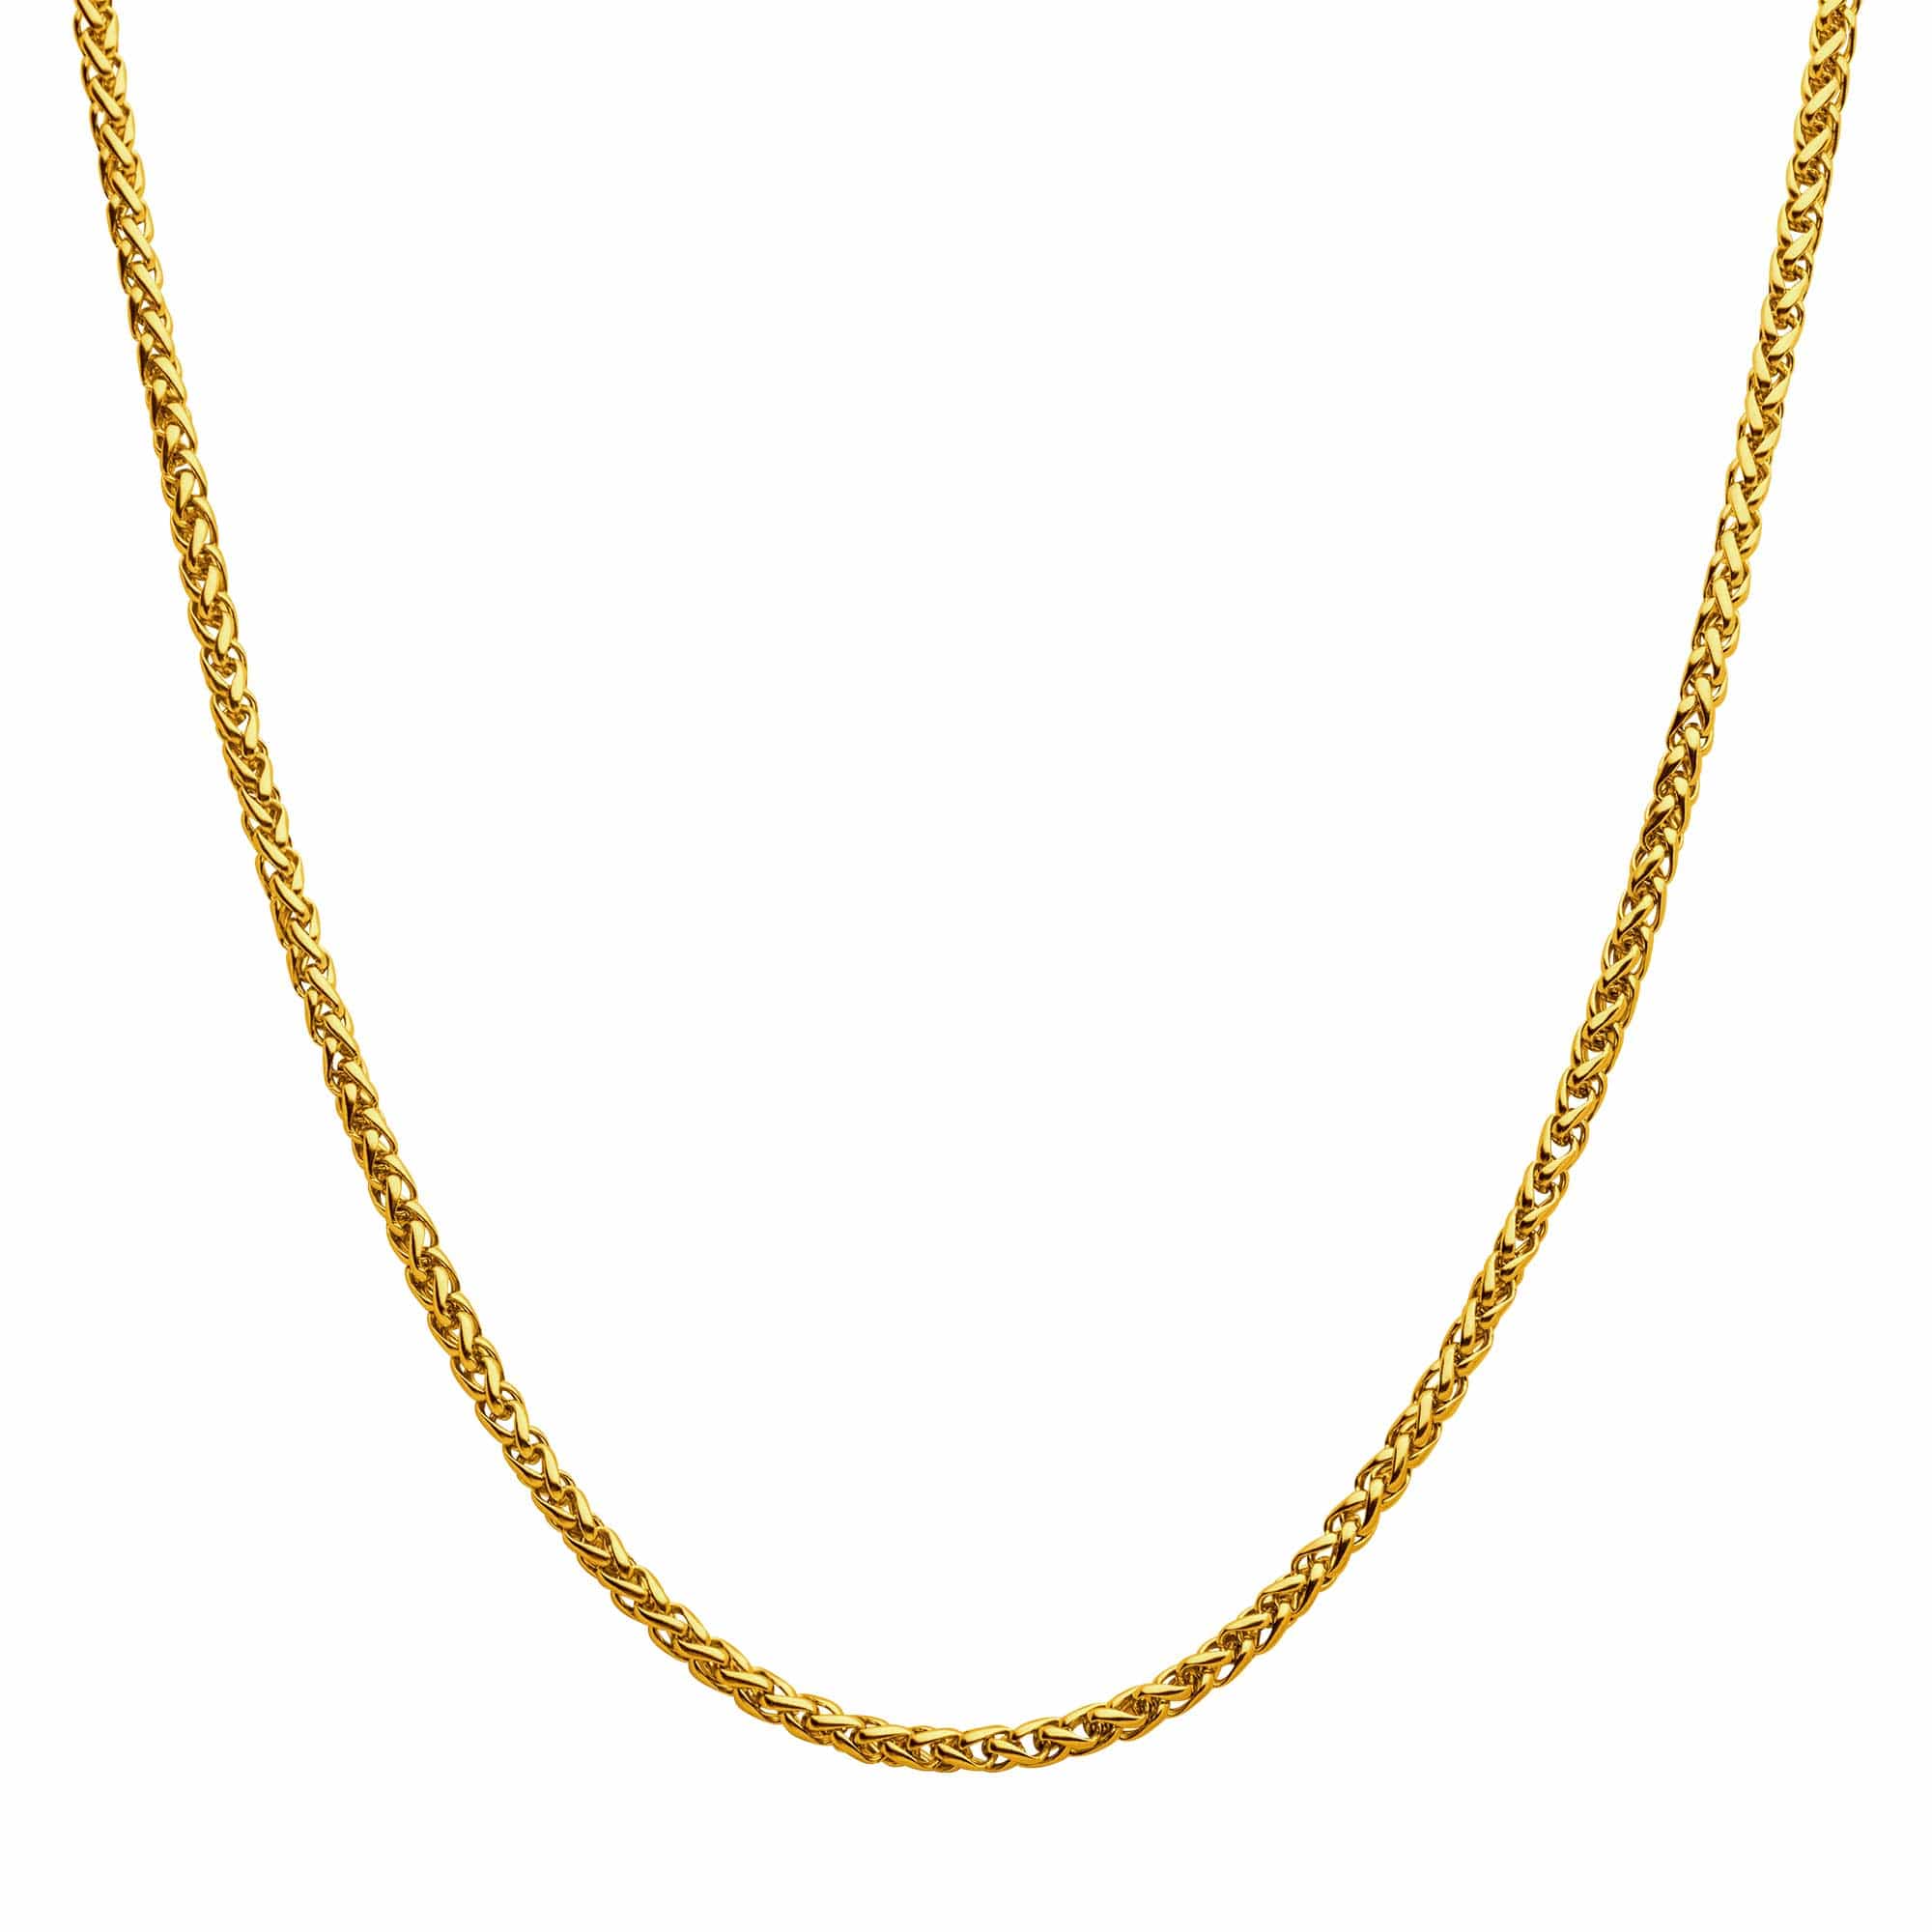 INOX JEWELRY Chains 18K Gold Ion Plated Stainless Steel 4mm Wheat Chain